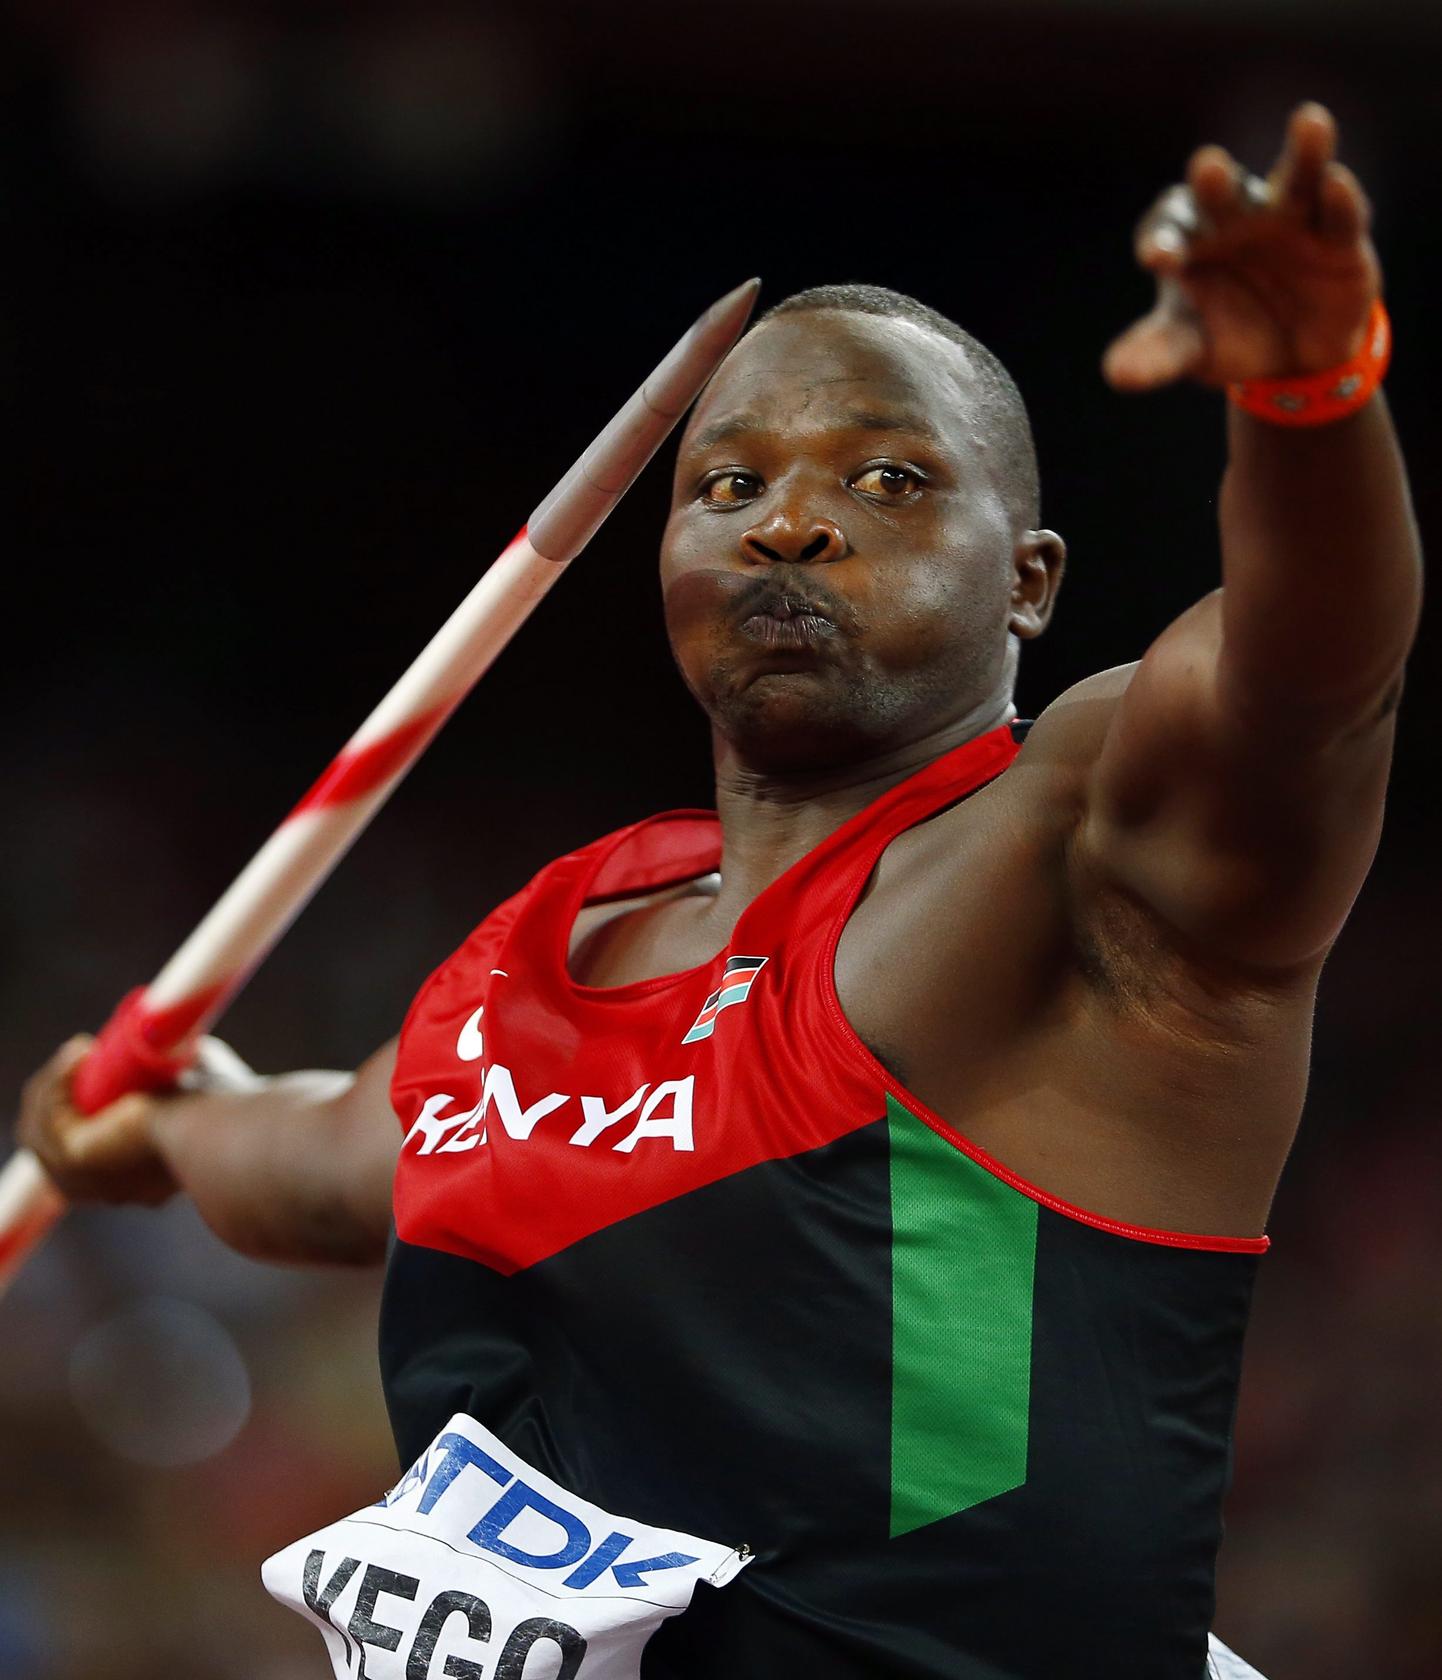 Kenya's Julius Yego produced a monster throw of 92.72 metres to claim the men's javelin title at the world championships. Photo: EPA